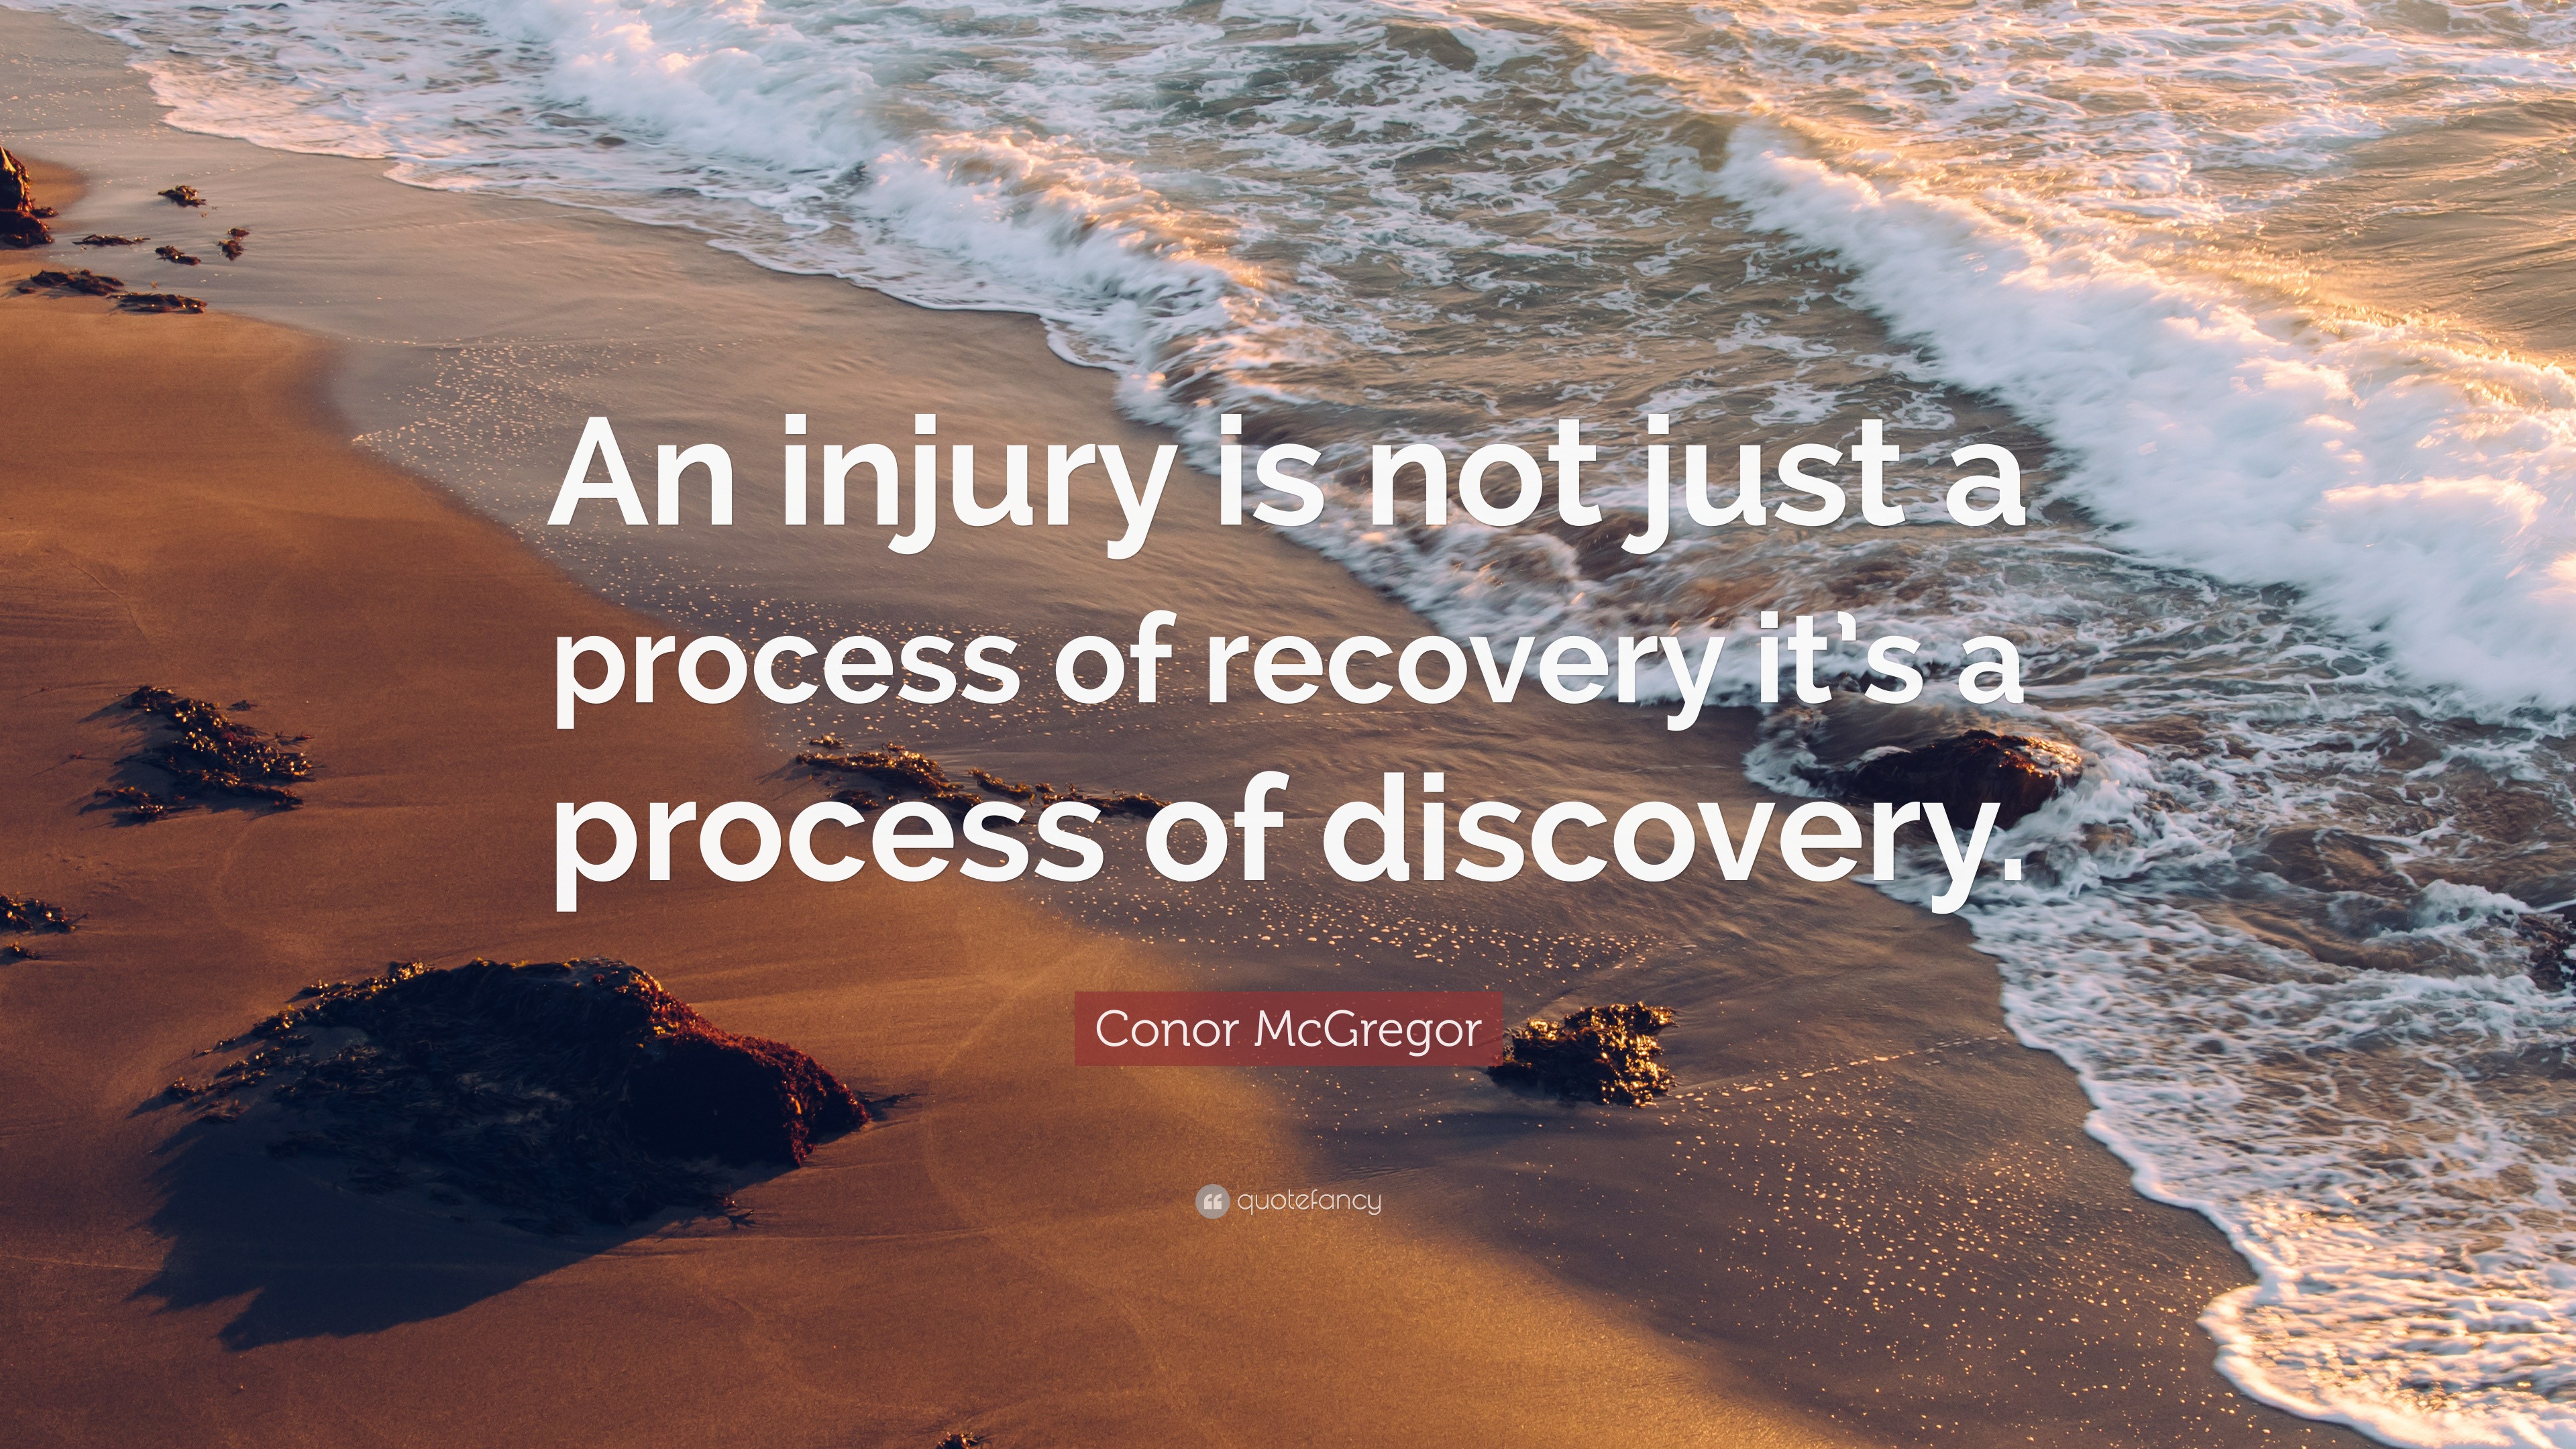 1 Injury is not just a process of recovery, it's a process of